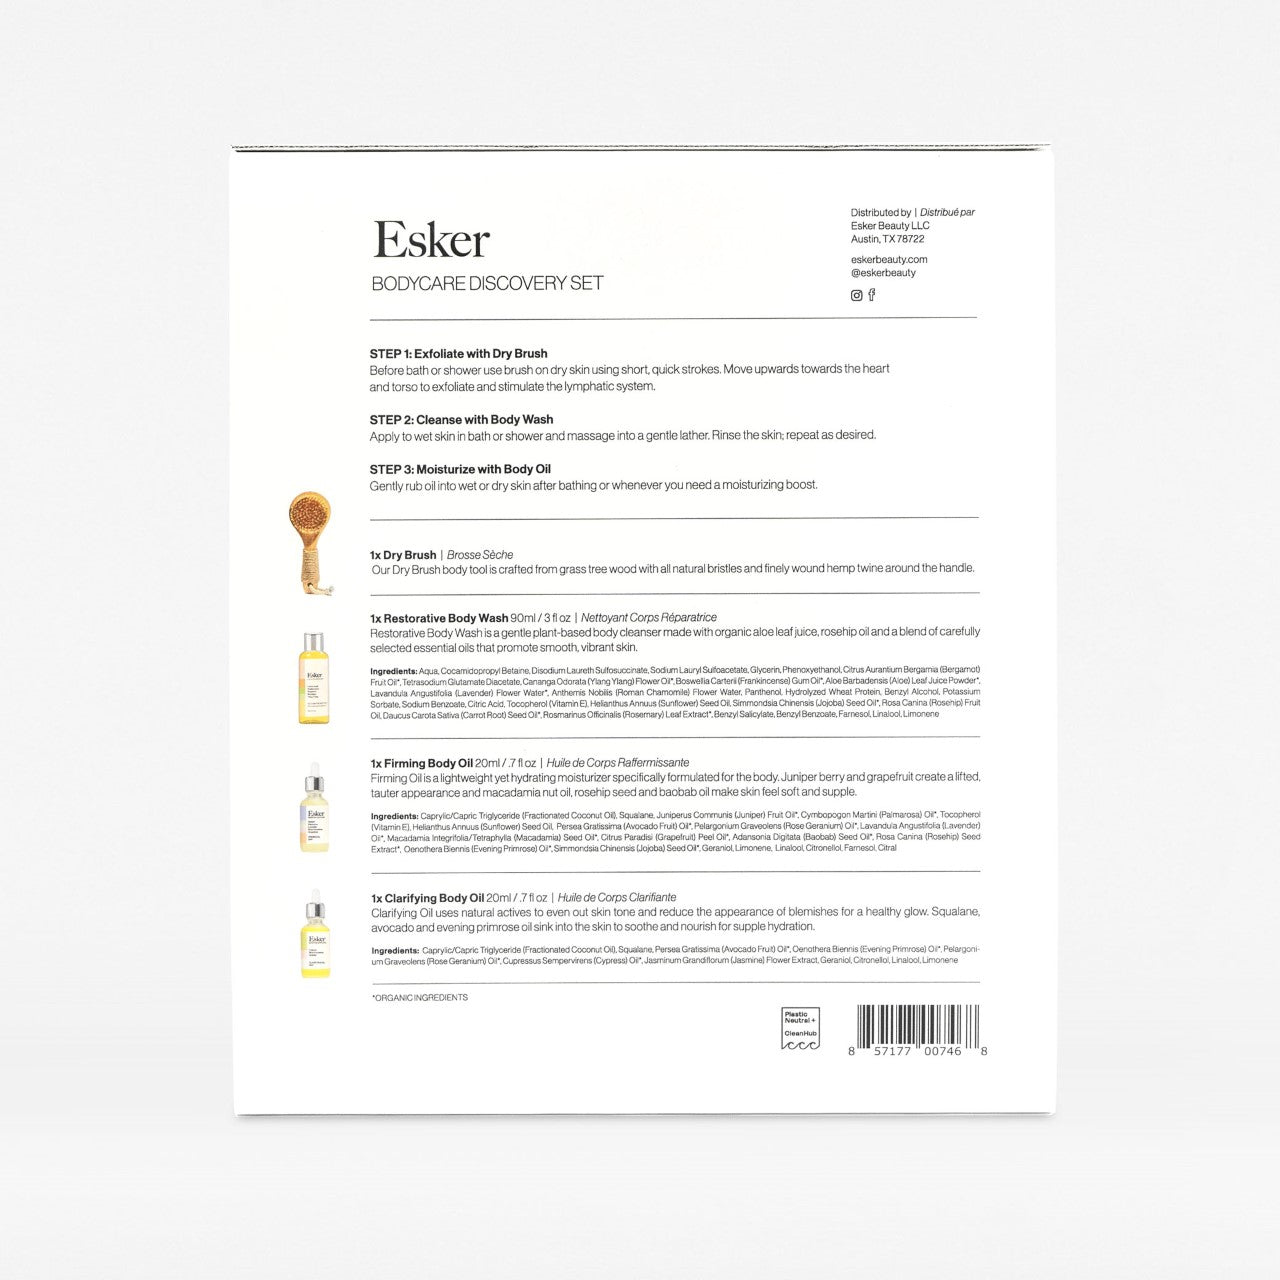 Esker Bodycare Discovery Set with dry brush and body oils details